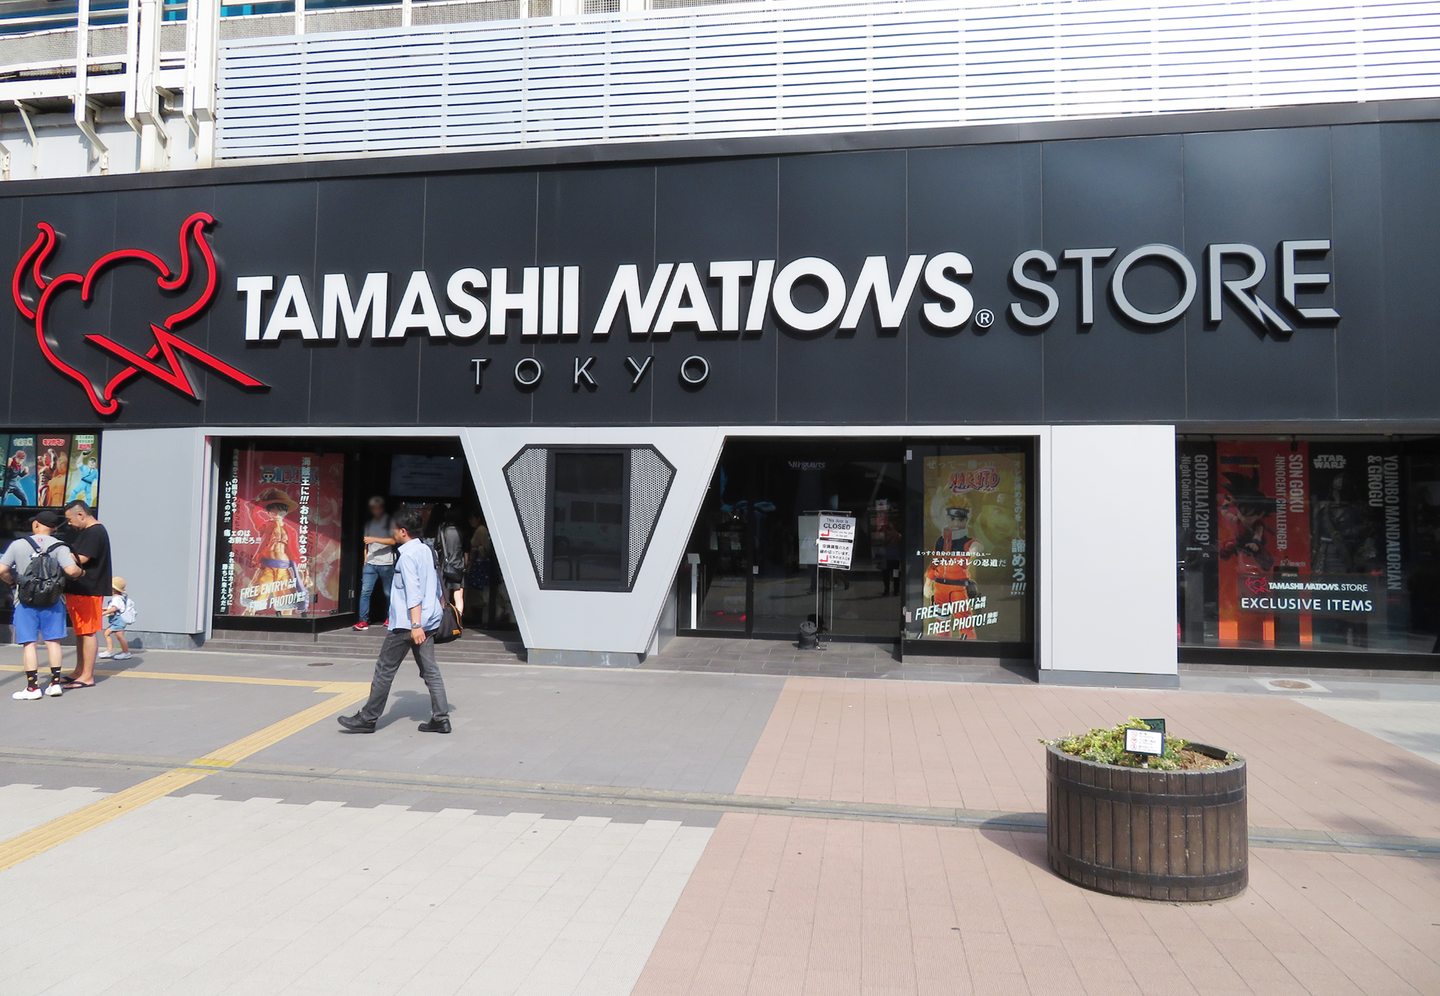 Exterior images of the Tamashi nations Store Tokyo